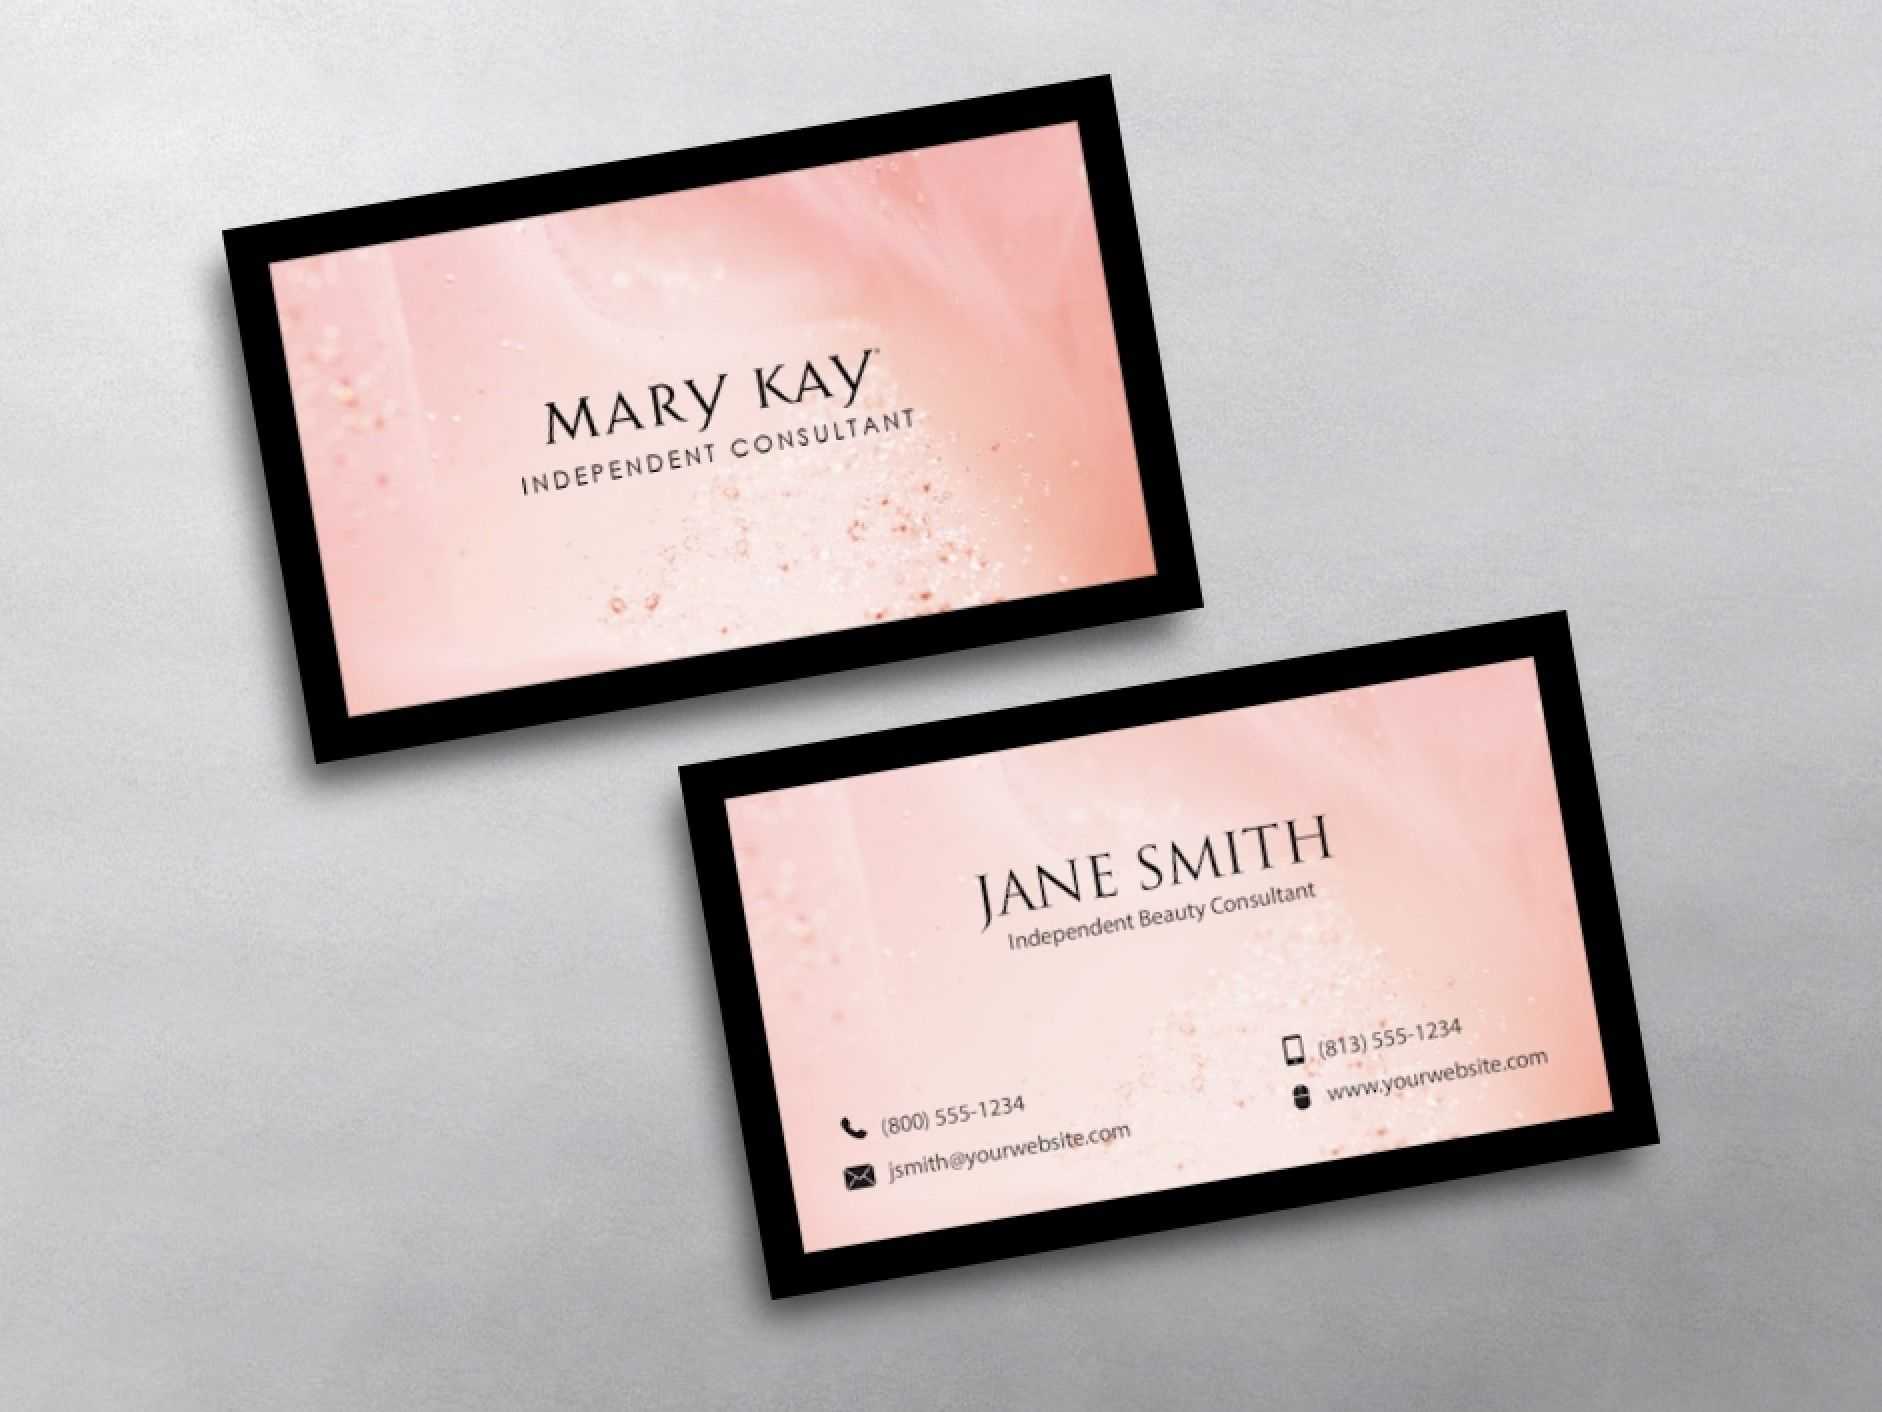 Mary Kay Business Cards In 2019 | Mary Kay, Business Card Throughout Mary Kay Business Cards Templates Free